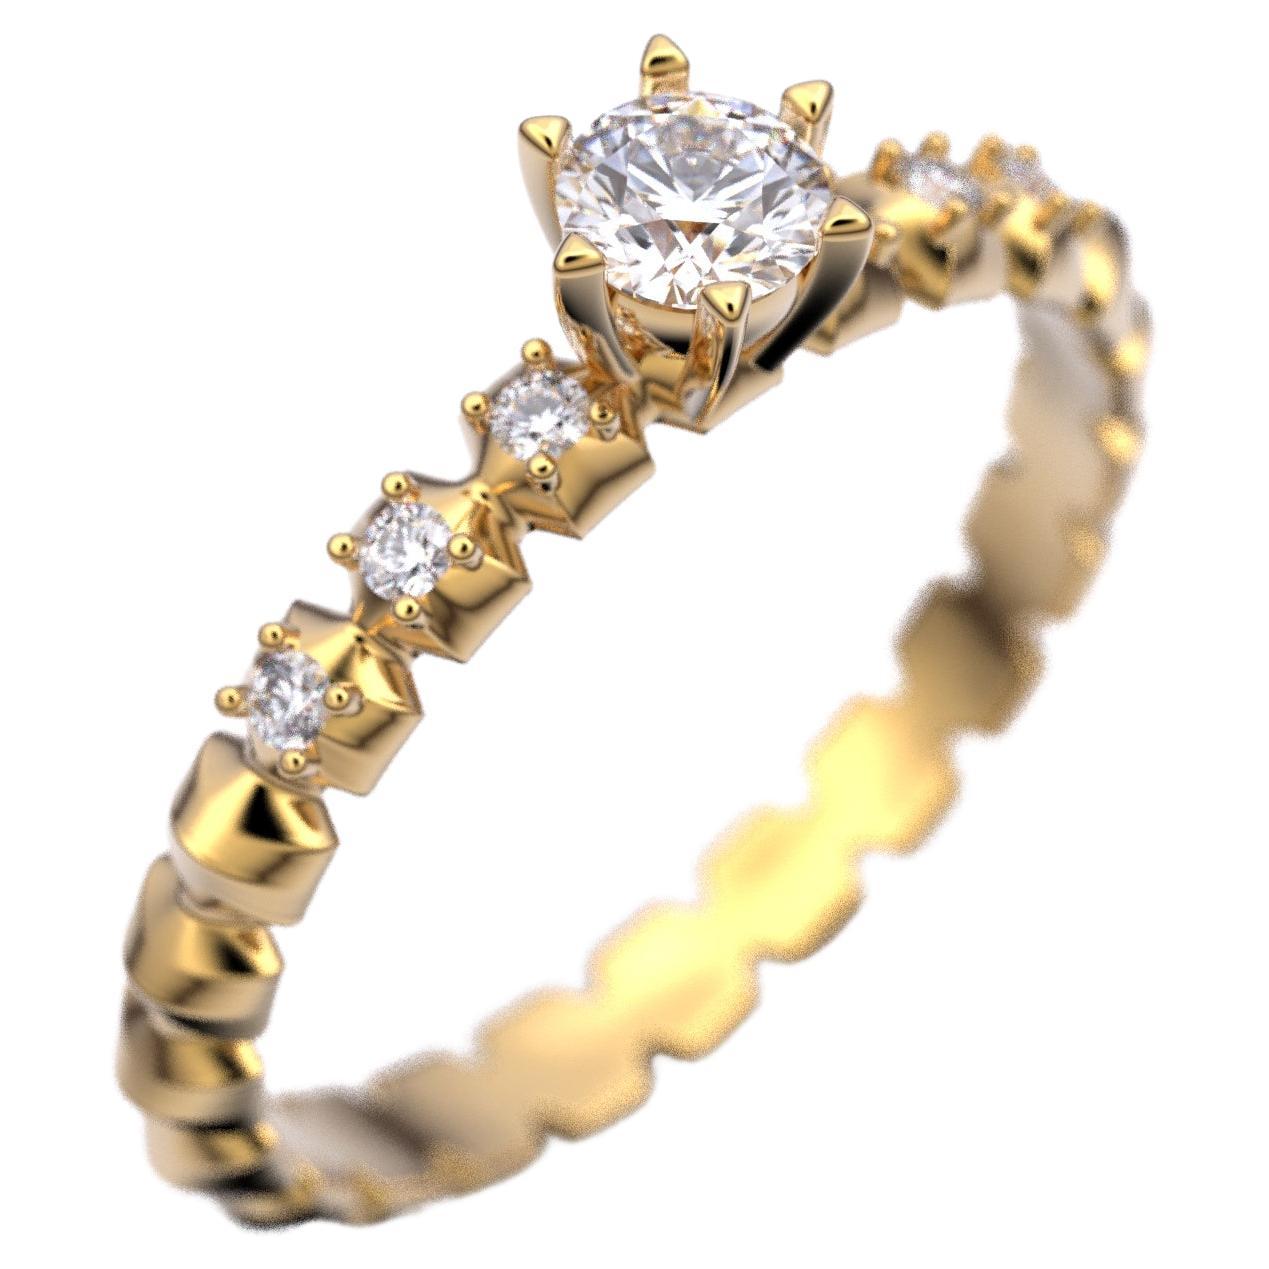 For Sale:  Italian-Made 0.32 Carat Diamond Engagement Ring in 18k Solid Gold